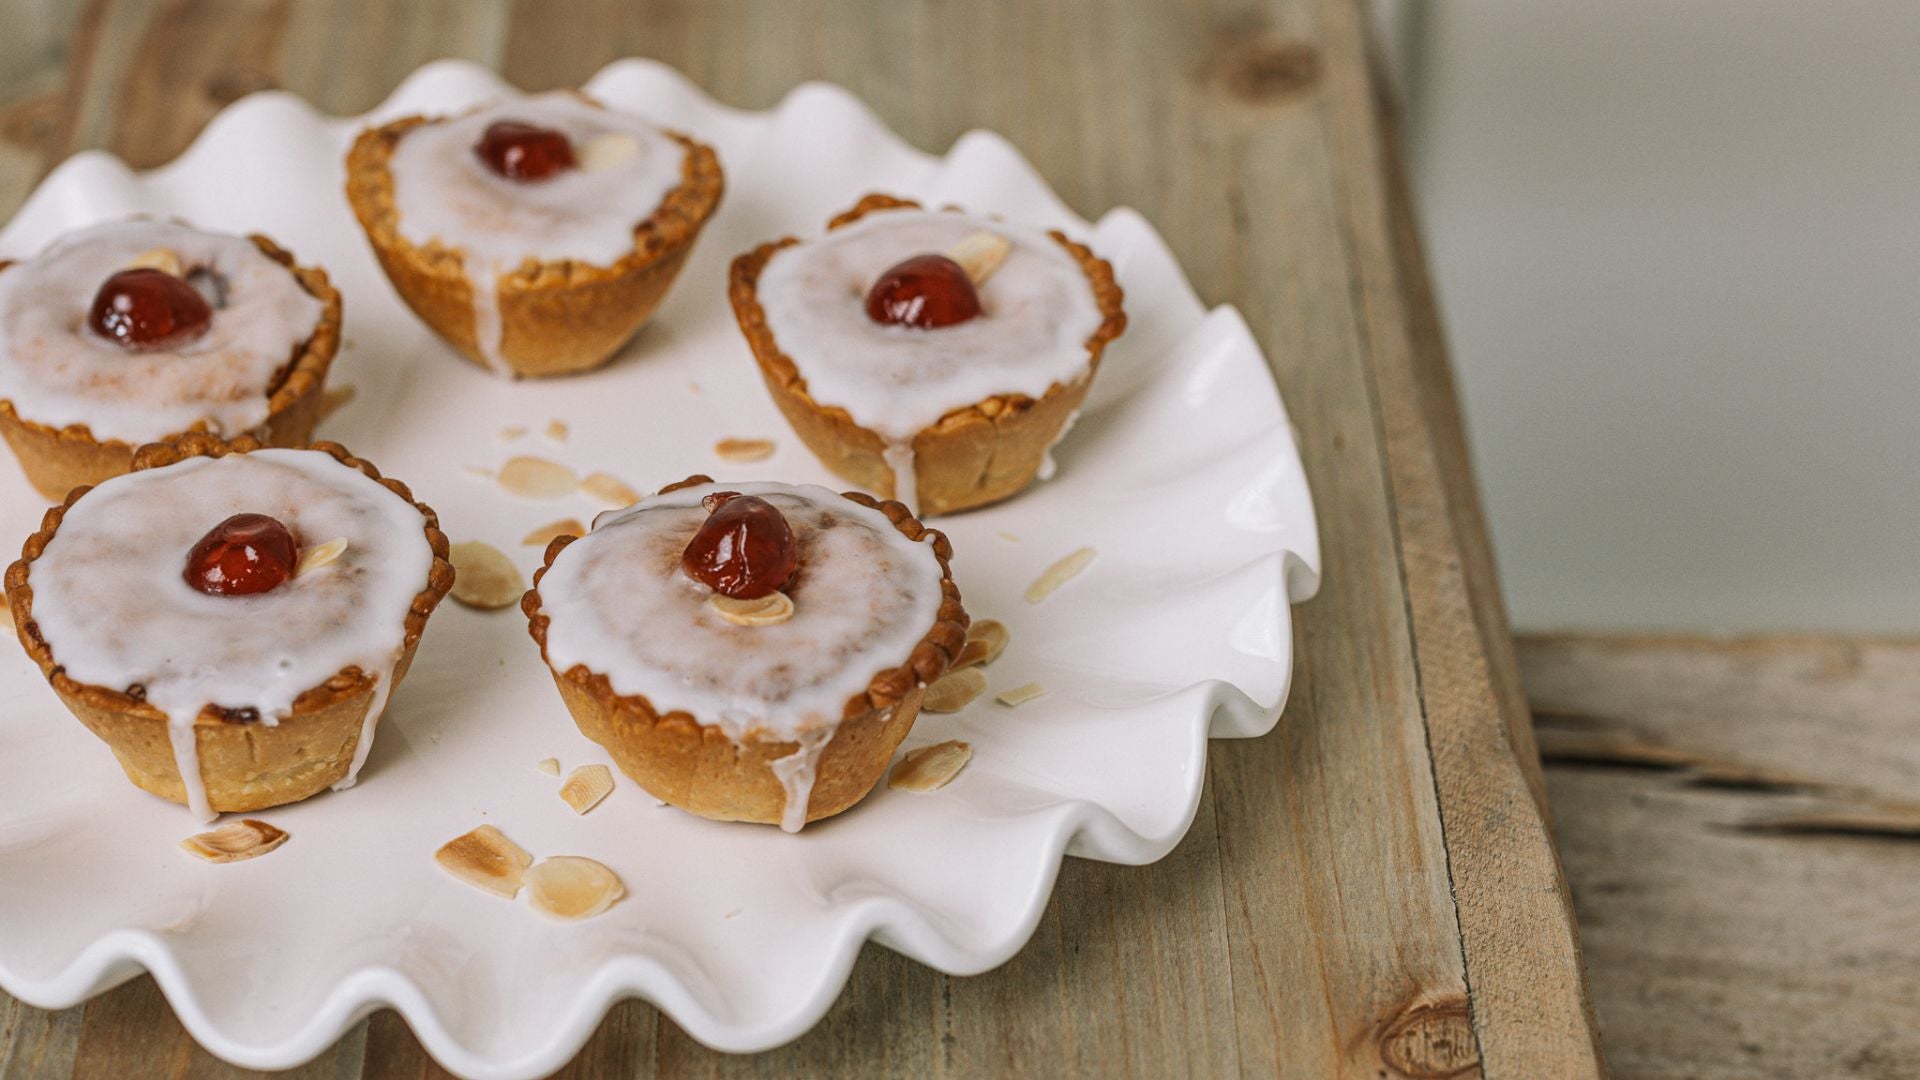 Cherry bakewell tarts on frilly white plate.